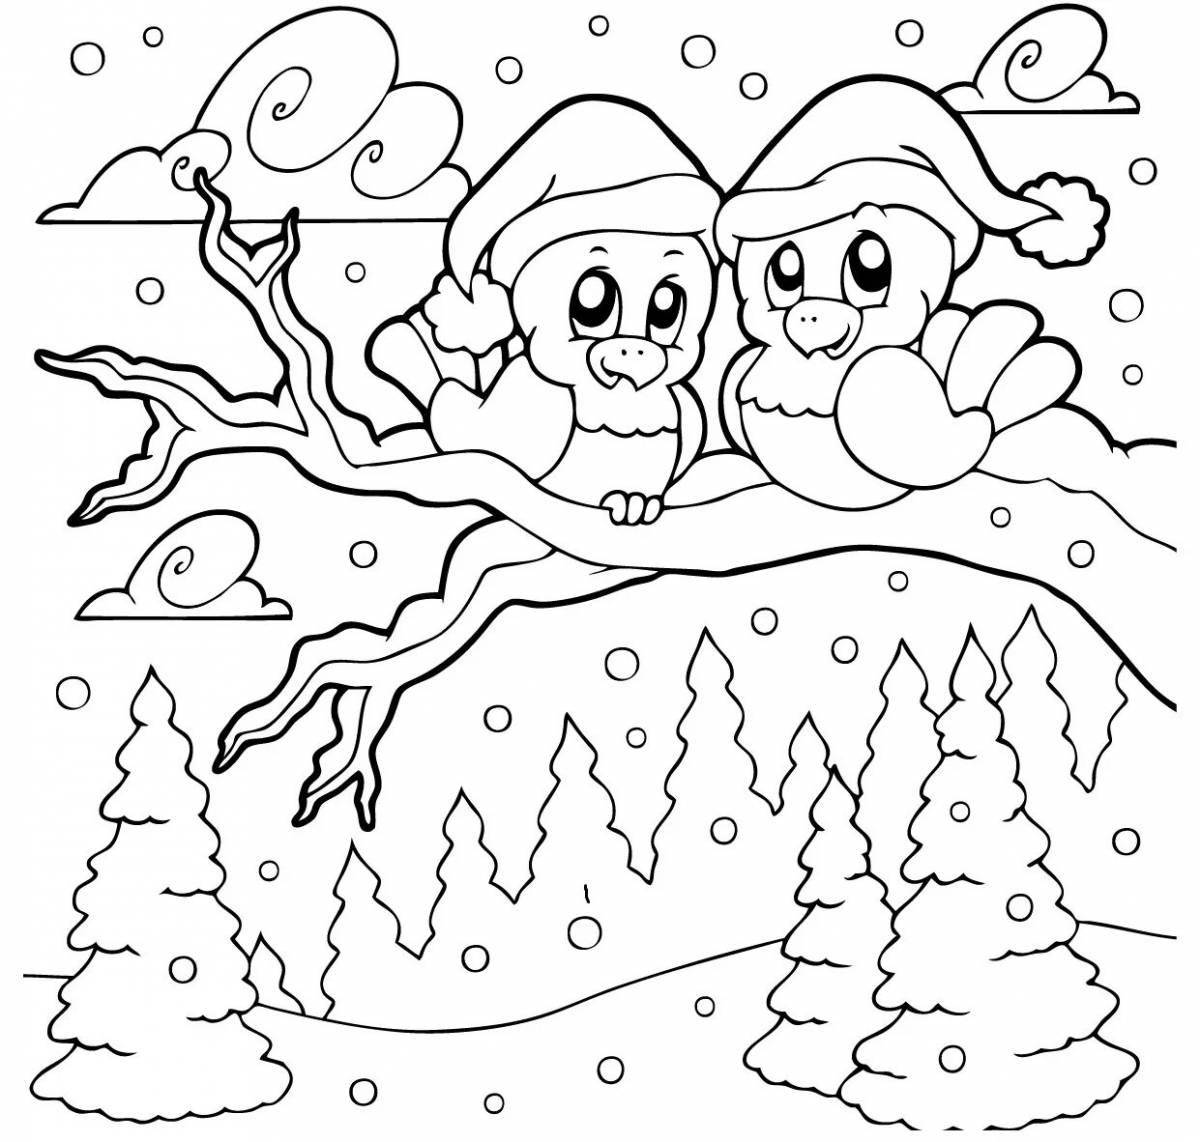 Gorgeous winter landscape coloring for children 3-4 years old